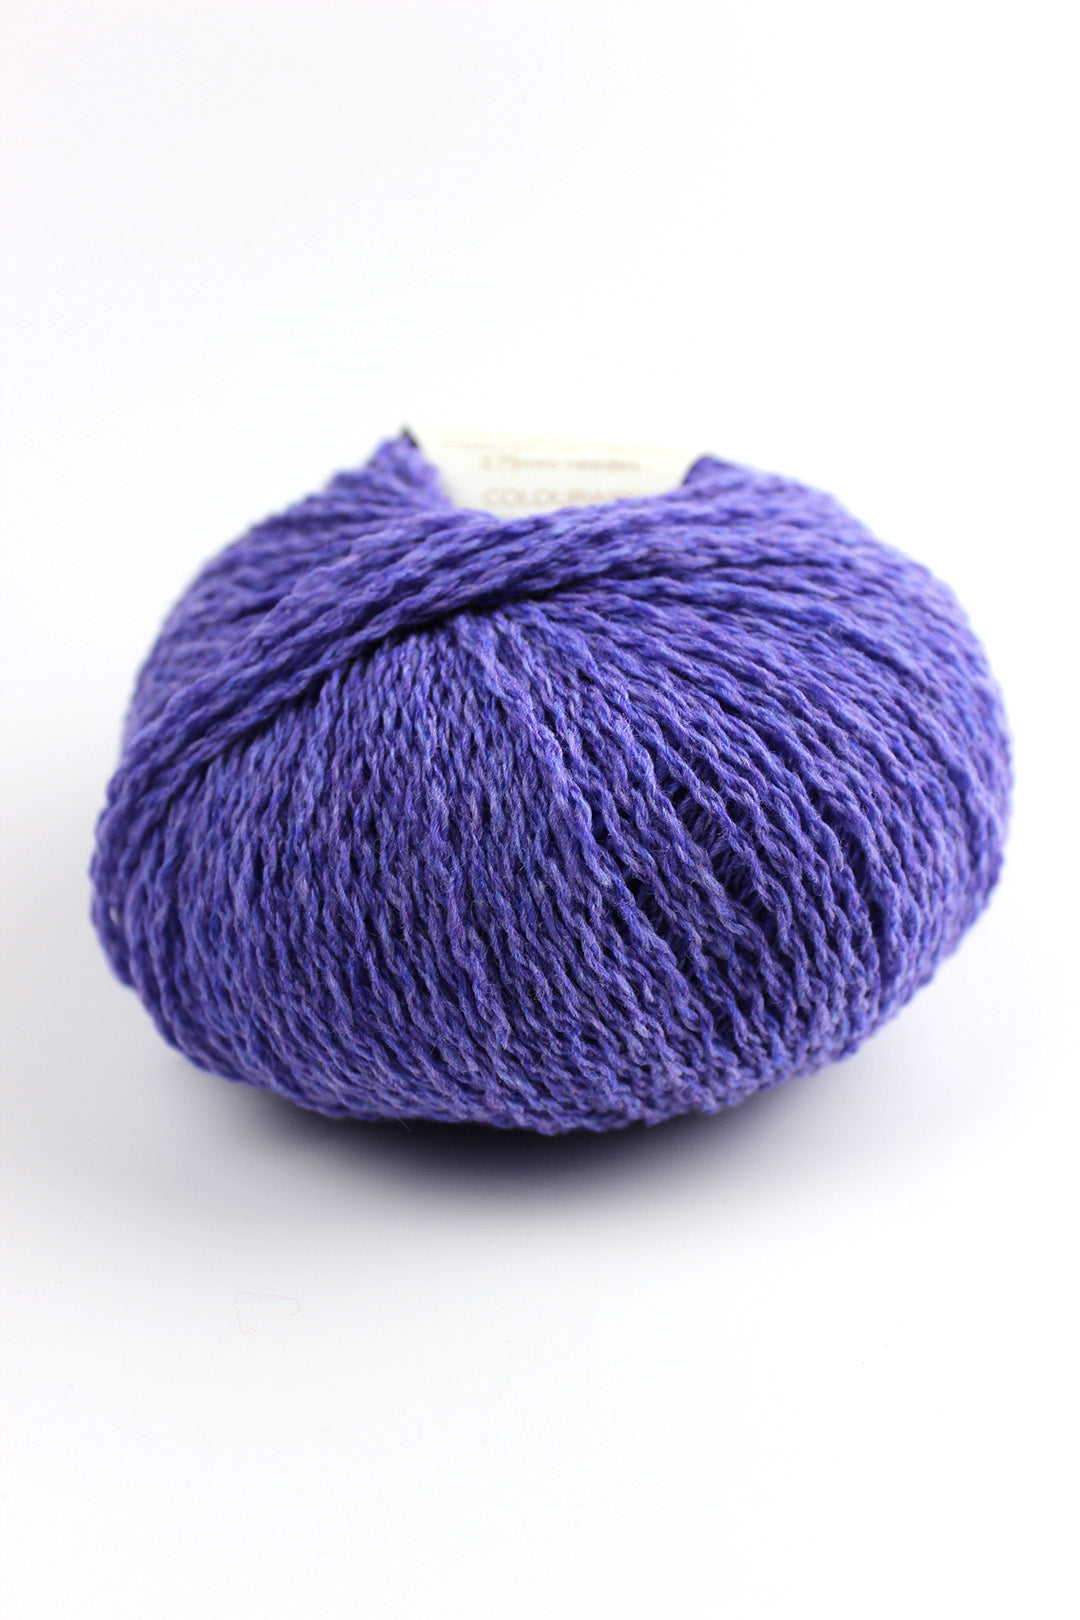 Inspired by the colours of the sky at twilight, this knitting wool is a beautiful shade of purple and gives a lovely vintage look when knitted up.